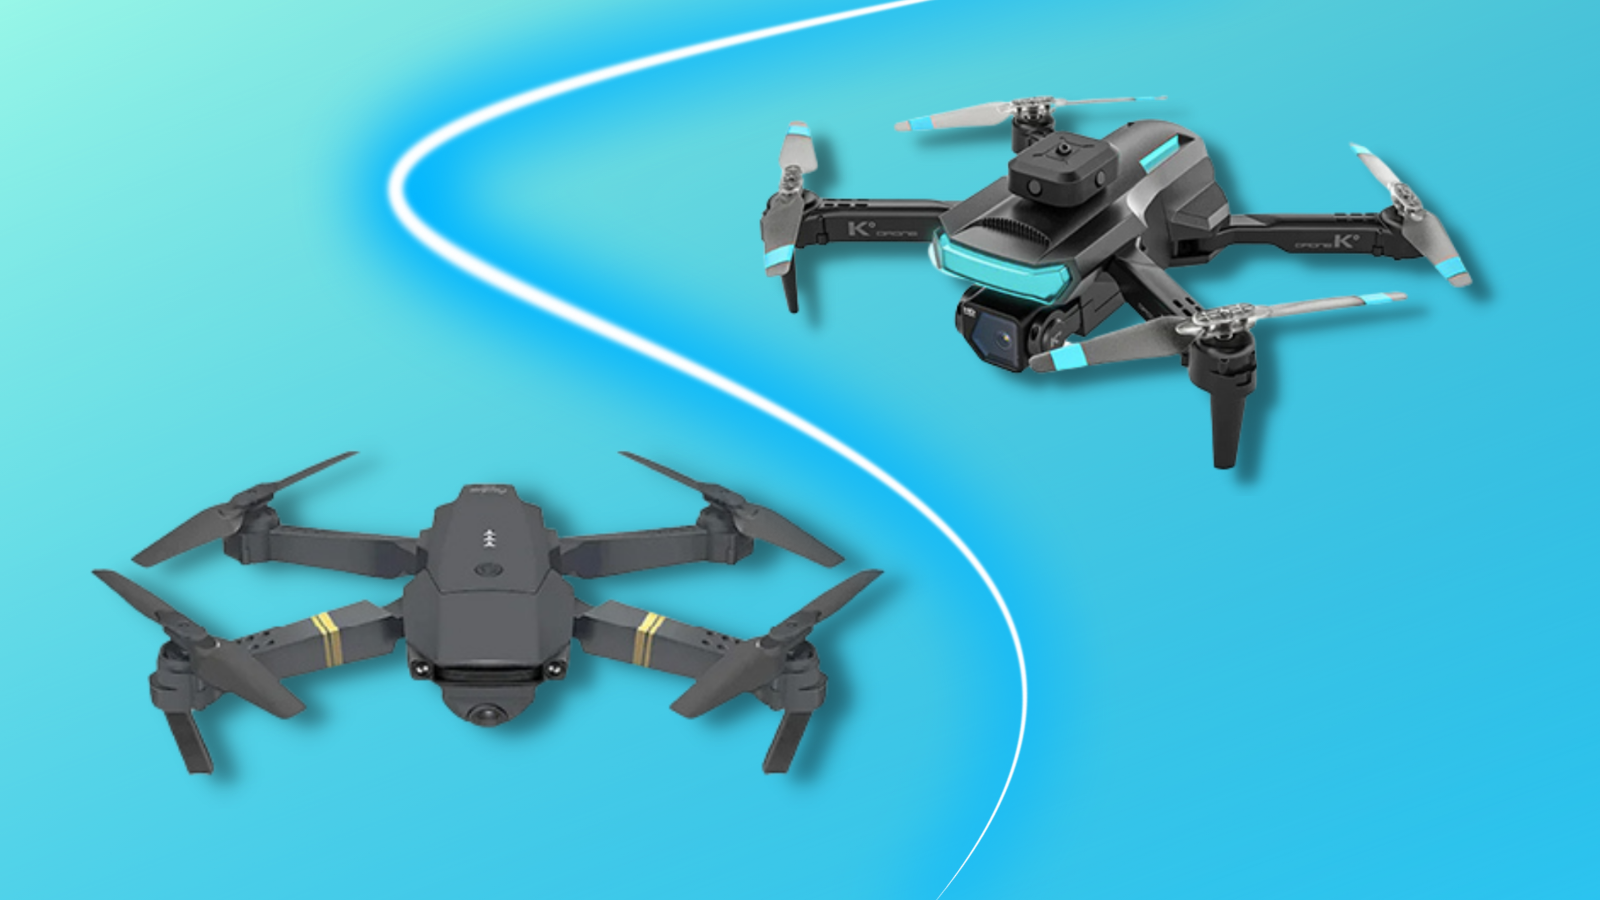 Ninja Dragon drones with blue background